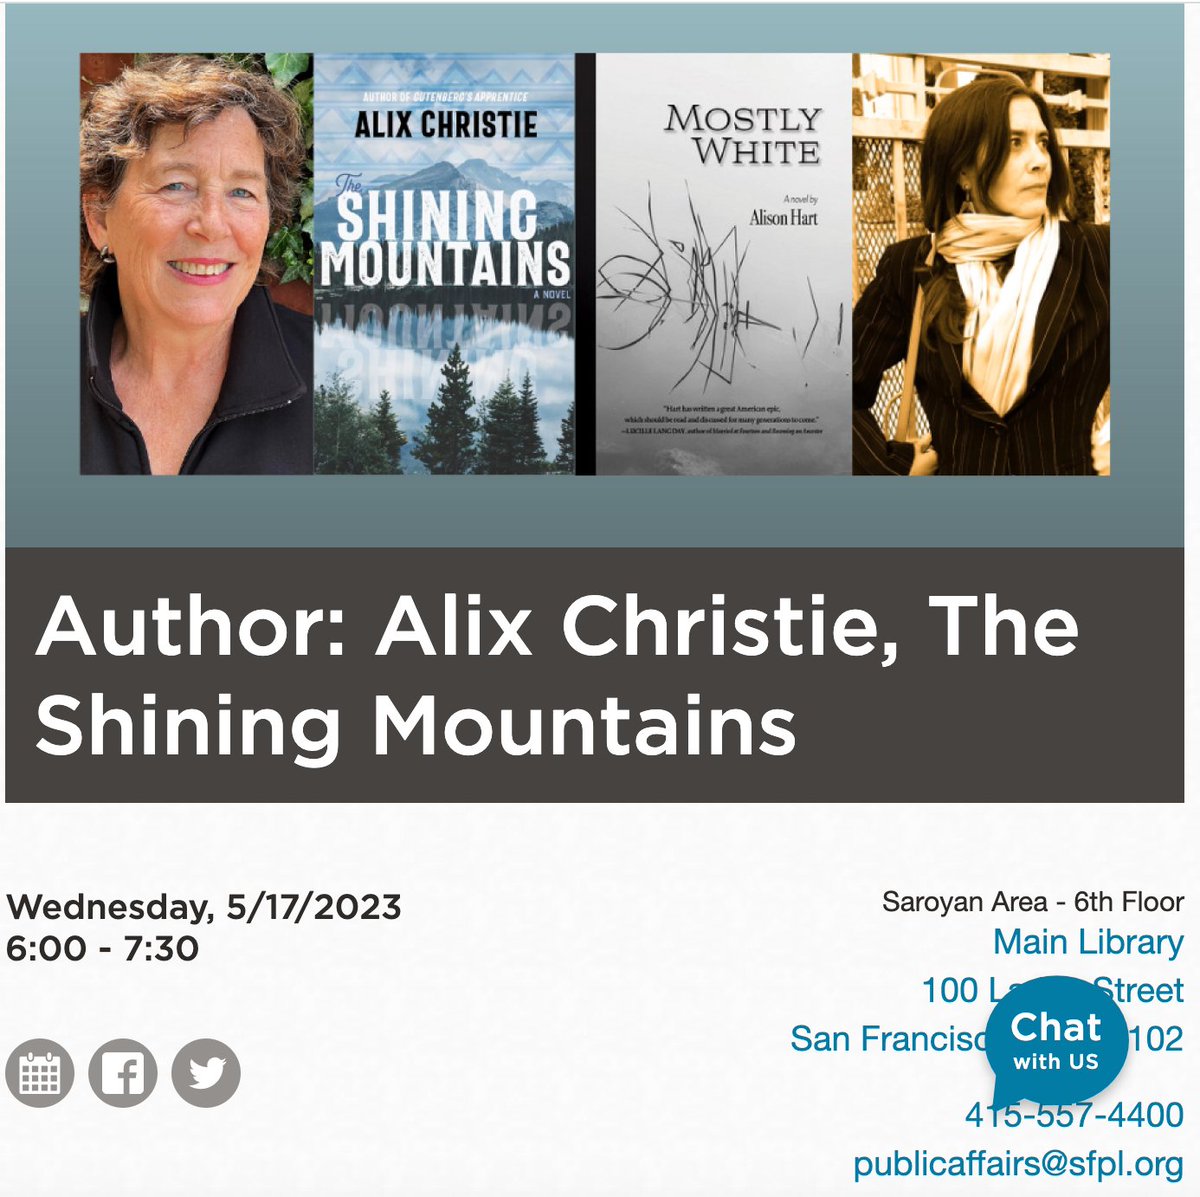 Tonight @ SF Public Library main branch, a conversation with Alison Hart about my new novel #TheShiningMountains and the #truehistory and #nativehistory of America. Hope to see you there!